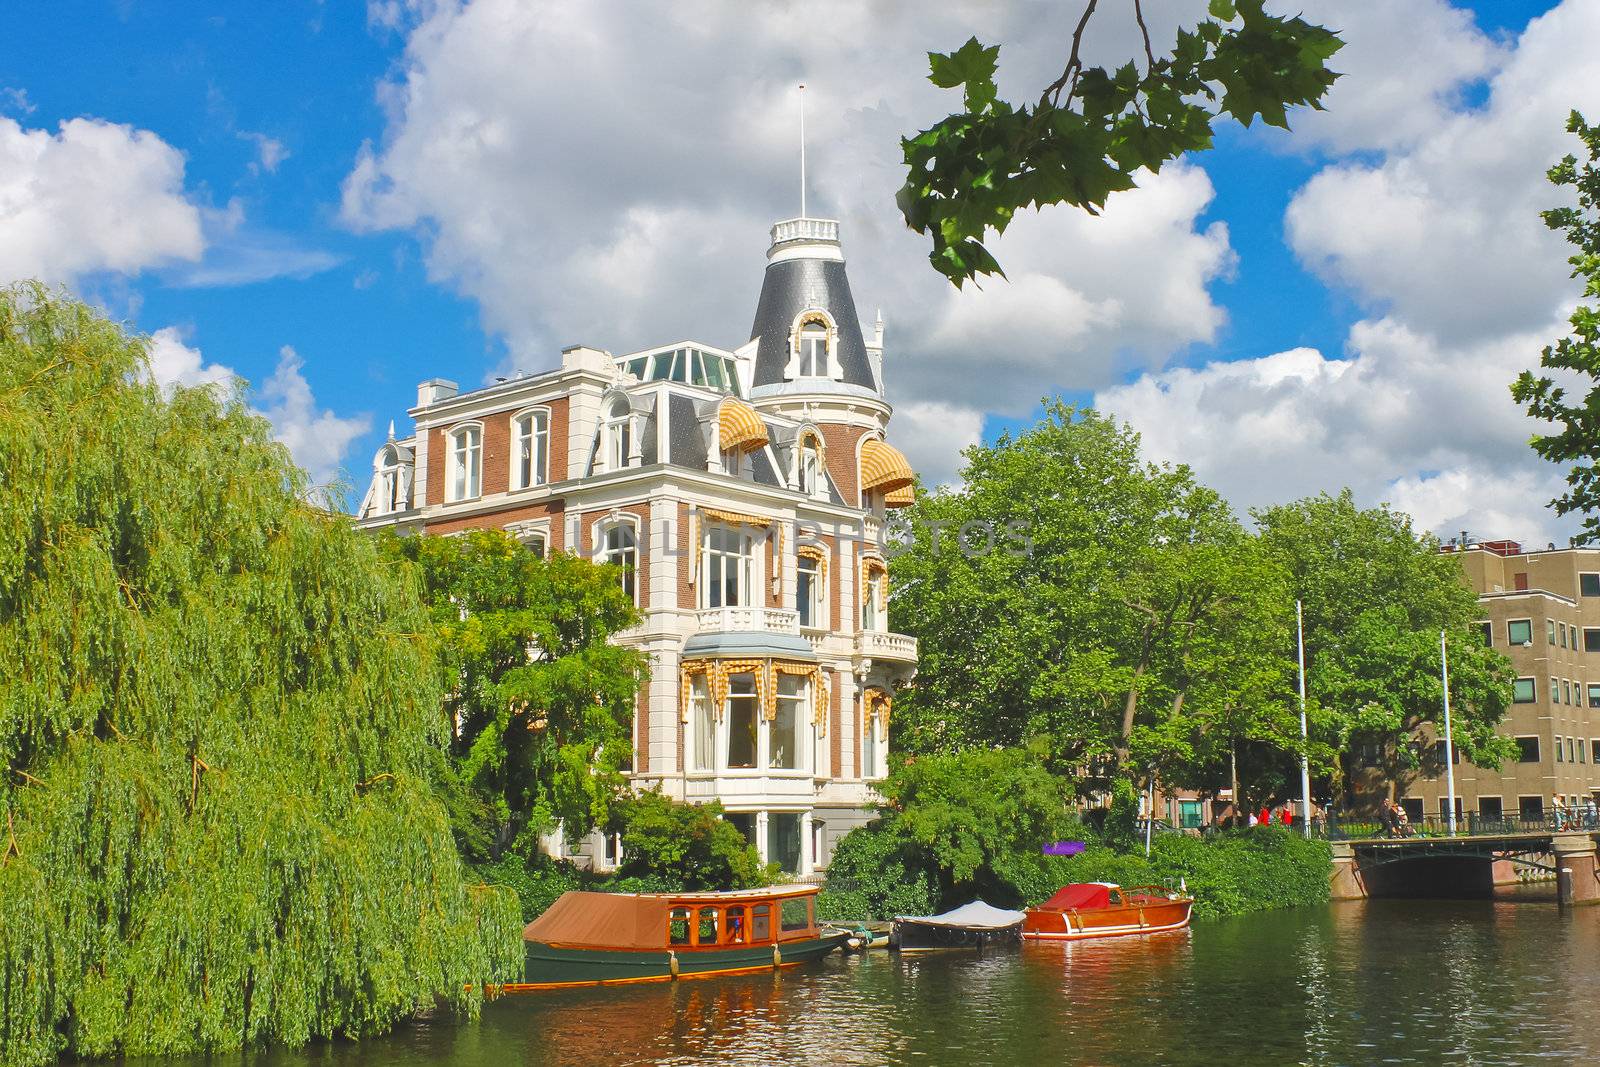 Beautiful mansion on a canal in Amsterdam. Netherlands by NickNick